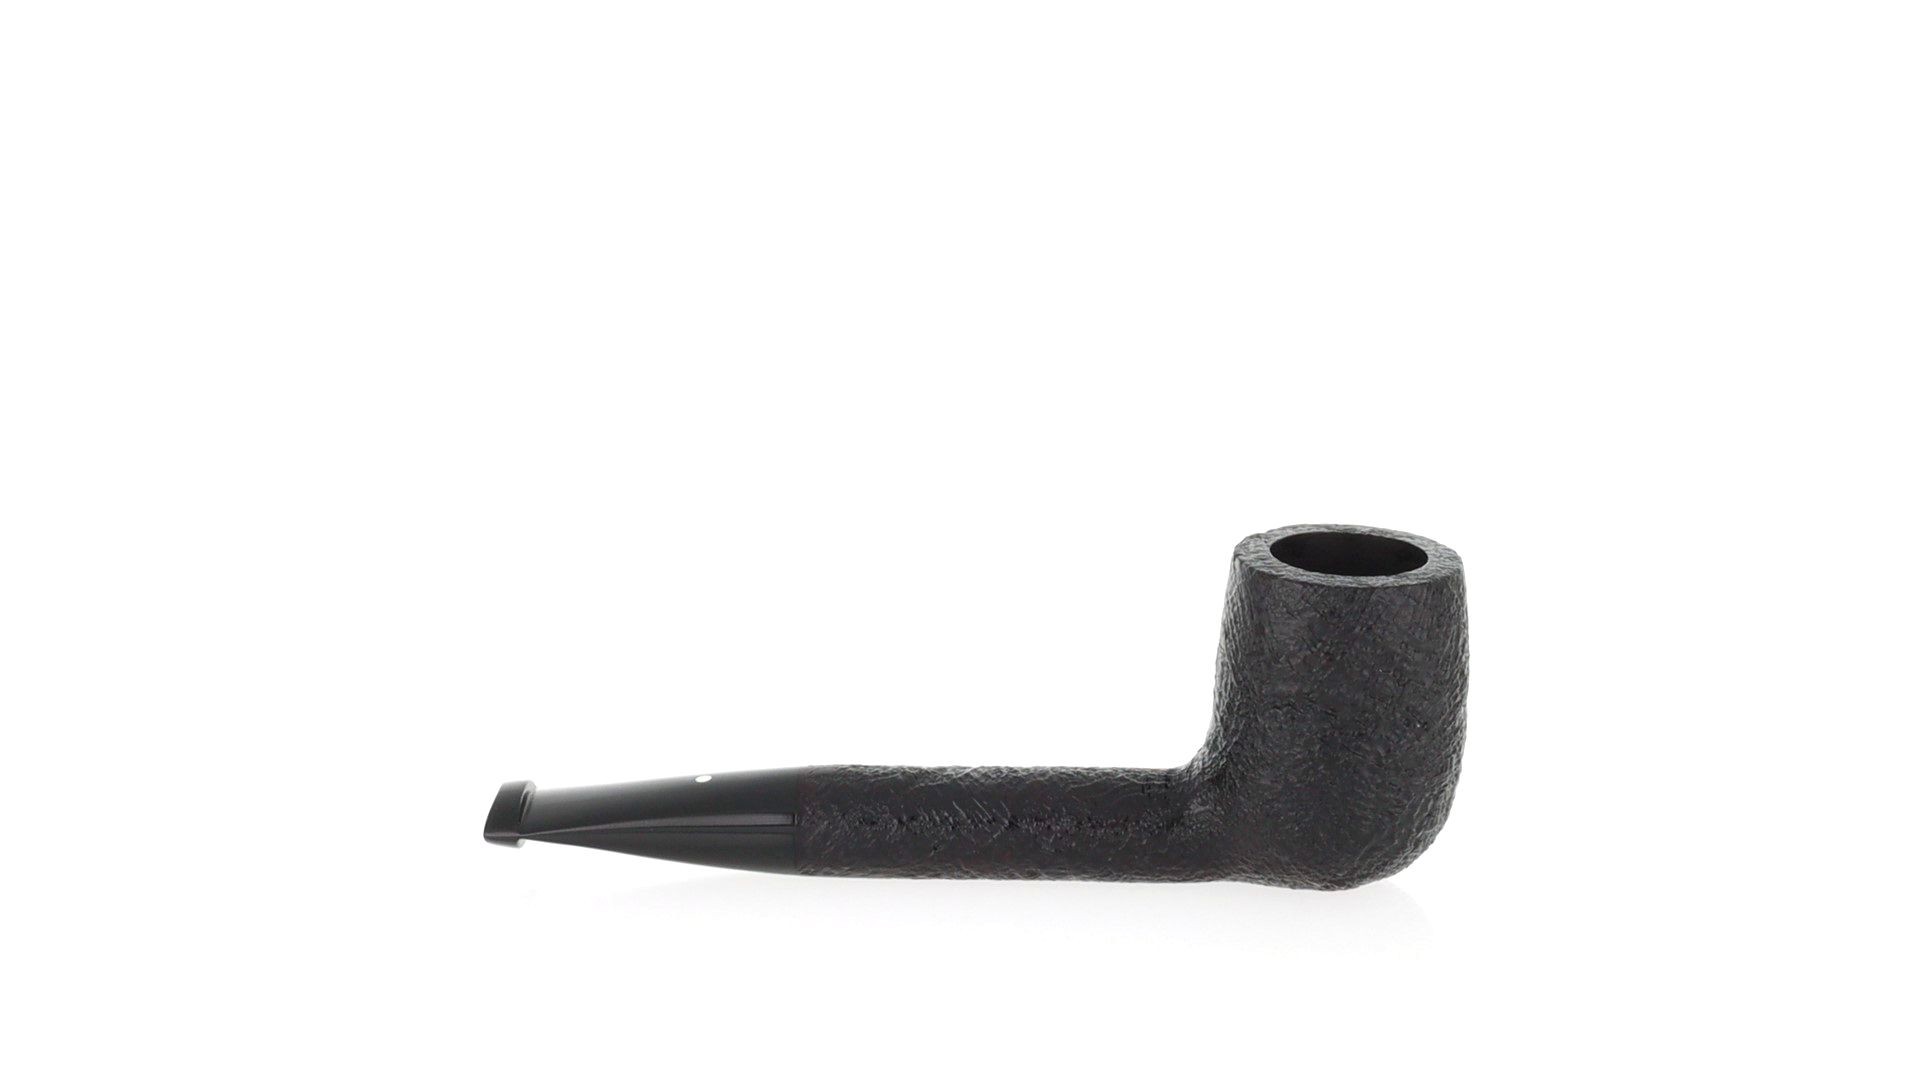 Pipe Dunhill Shell briar group 3 forme Liverpool